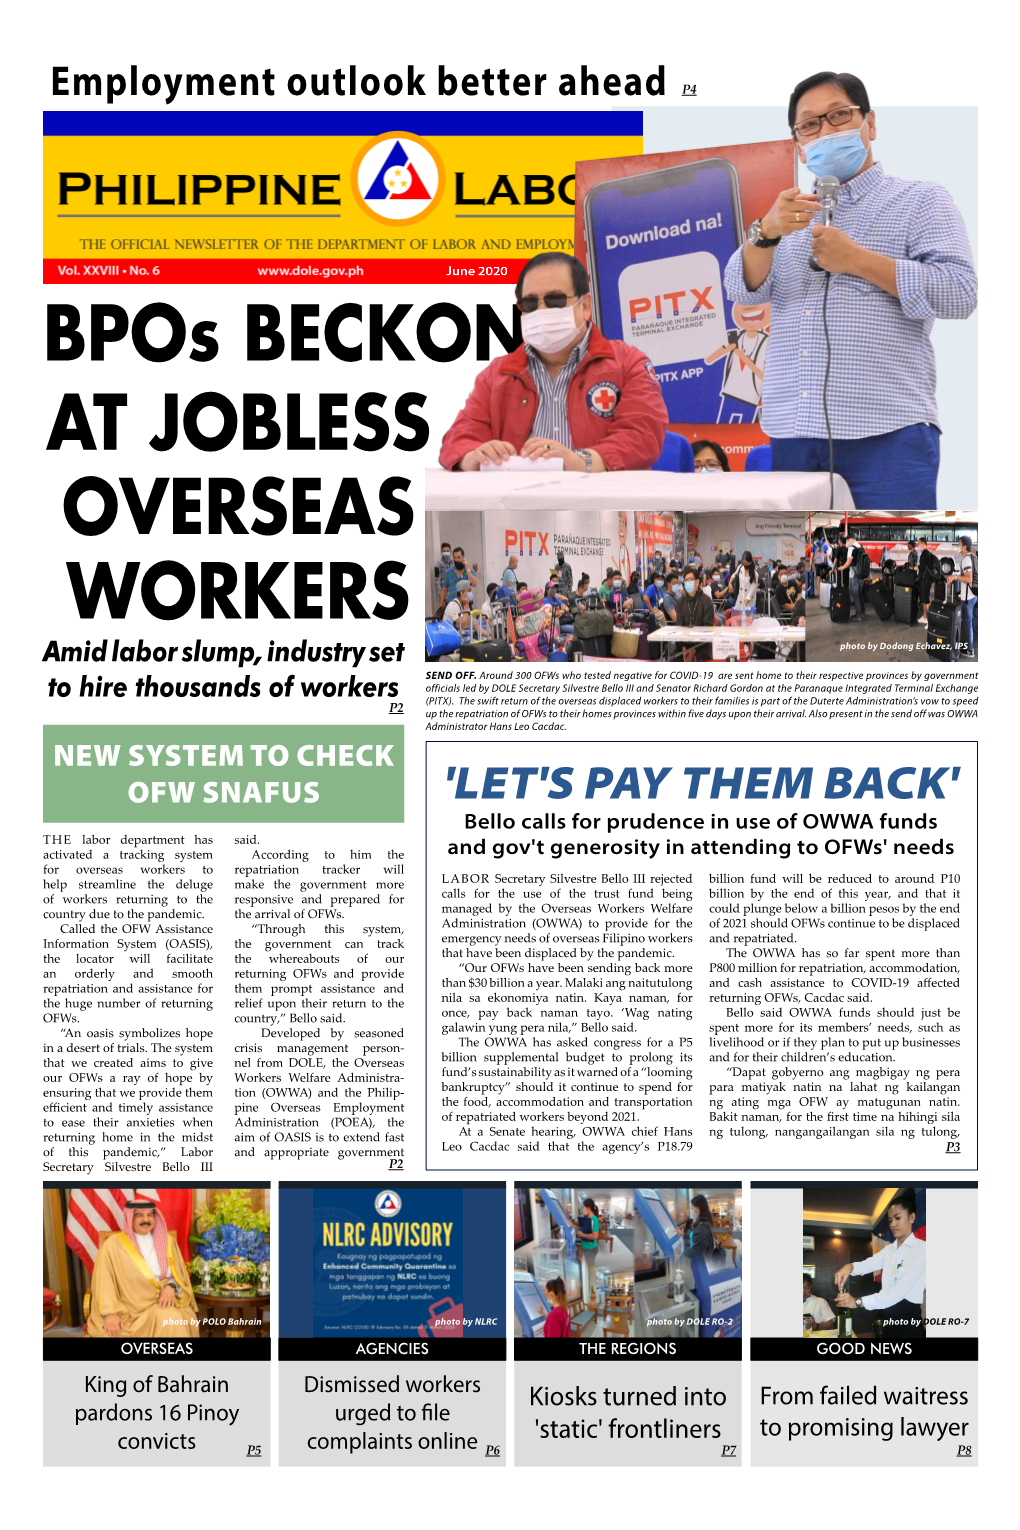 Bpos BECKON at JOBLESS OVERSEAS WORKERS Amid Labor Slump, Industry Set Photo by Dodong Echavez, IPS SEND OFF